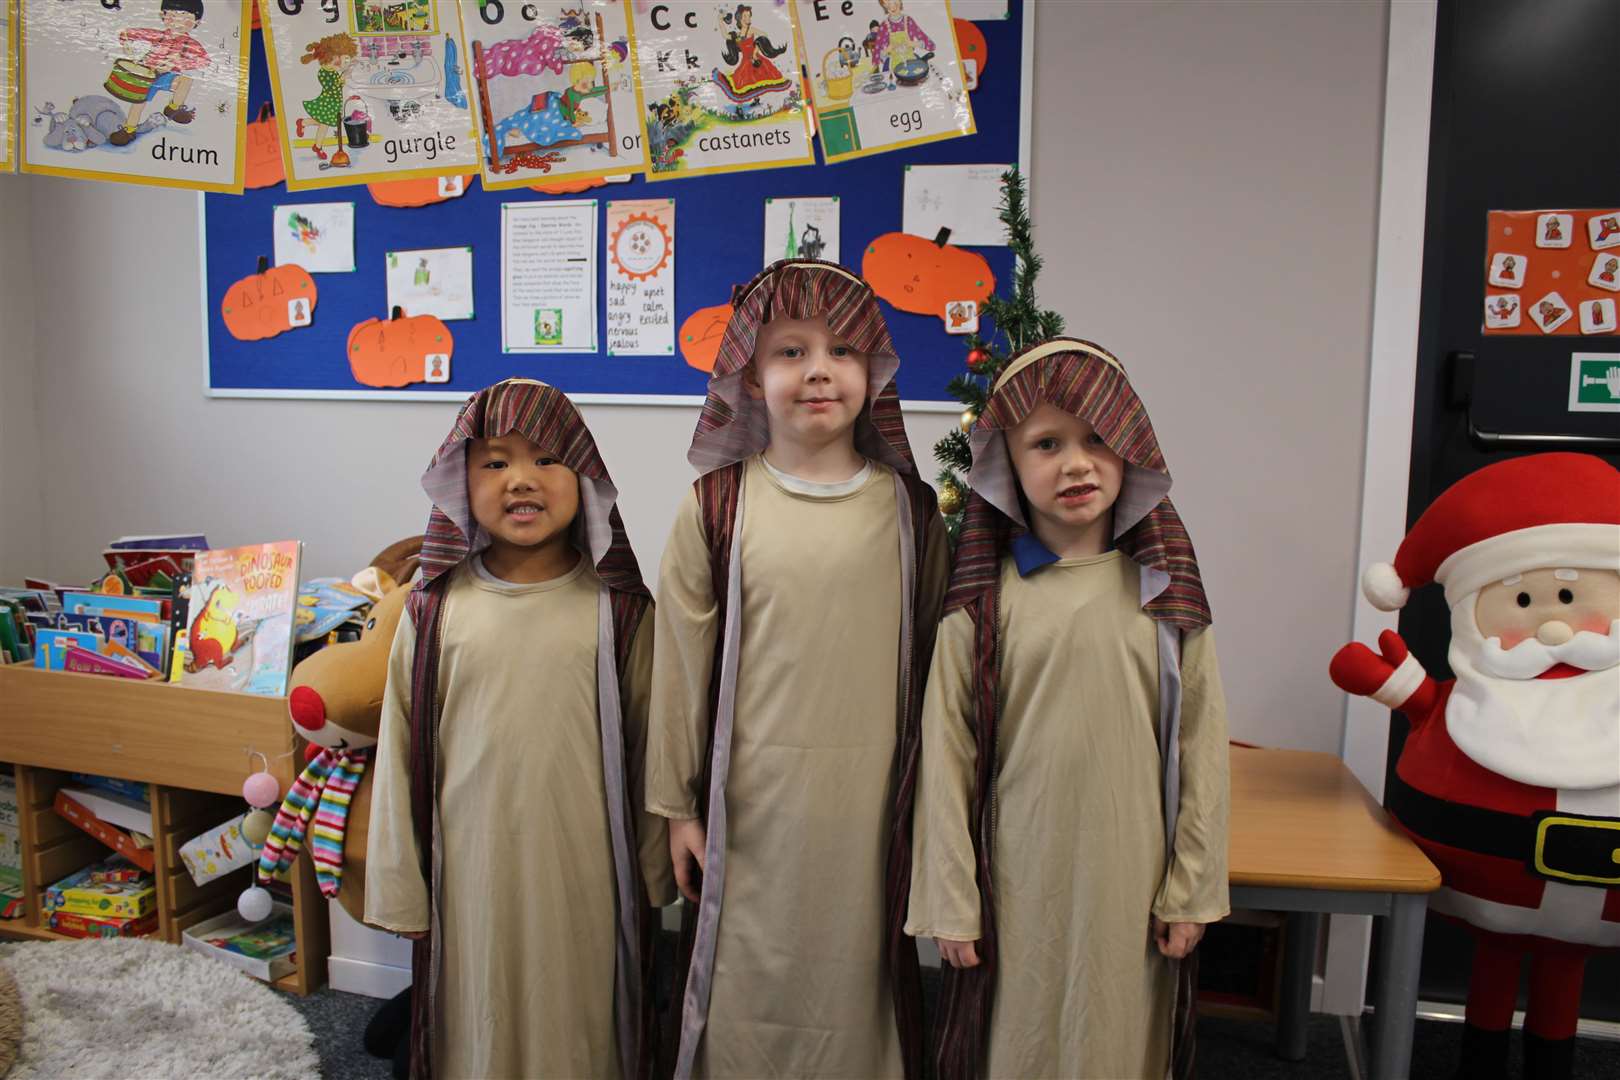 Primary 1 and 2 at Park Primary performed the Nativity of ‘Whoops-a-Daisy Angel’ last Wednesday which was recorded and shared with parents.